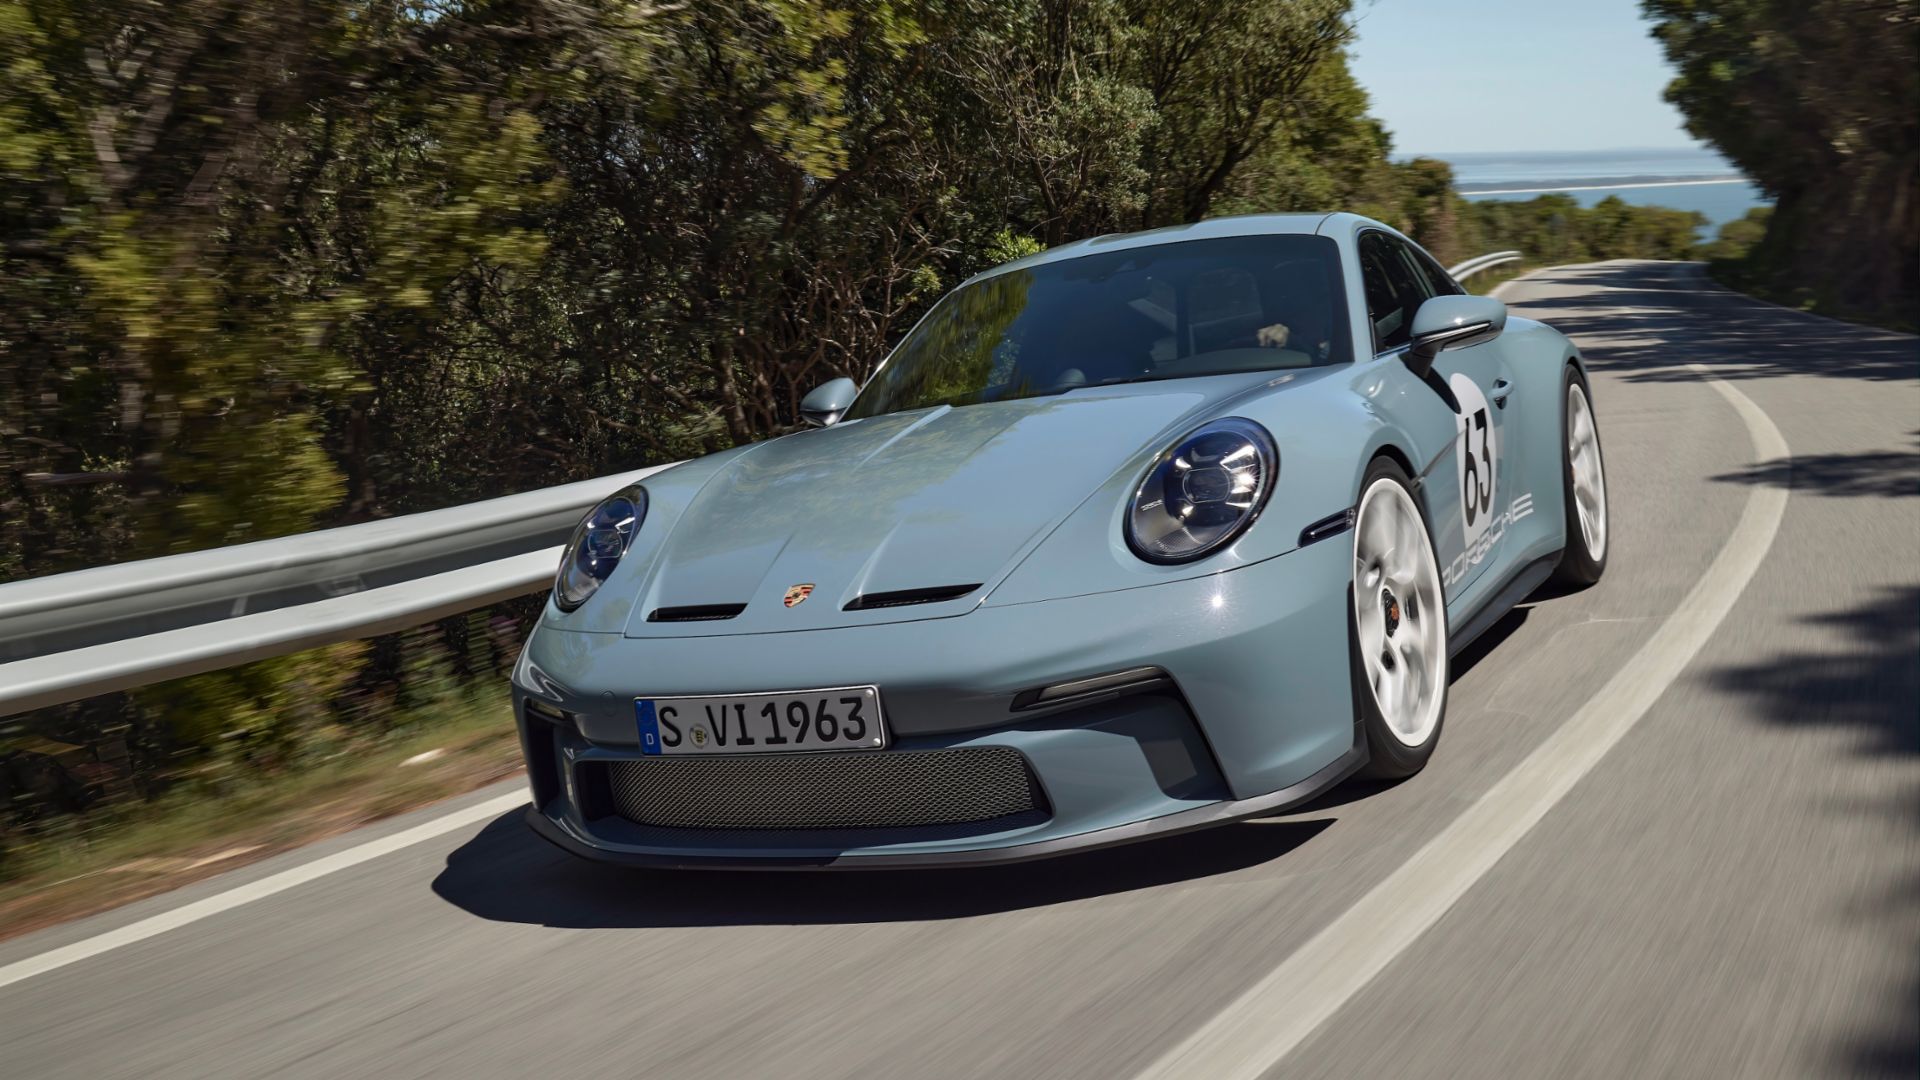 Porsche Celebrates 60 Years of 911 with GT-3 Based 911 S/T Priced at $660,500